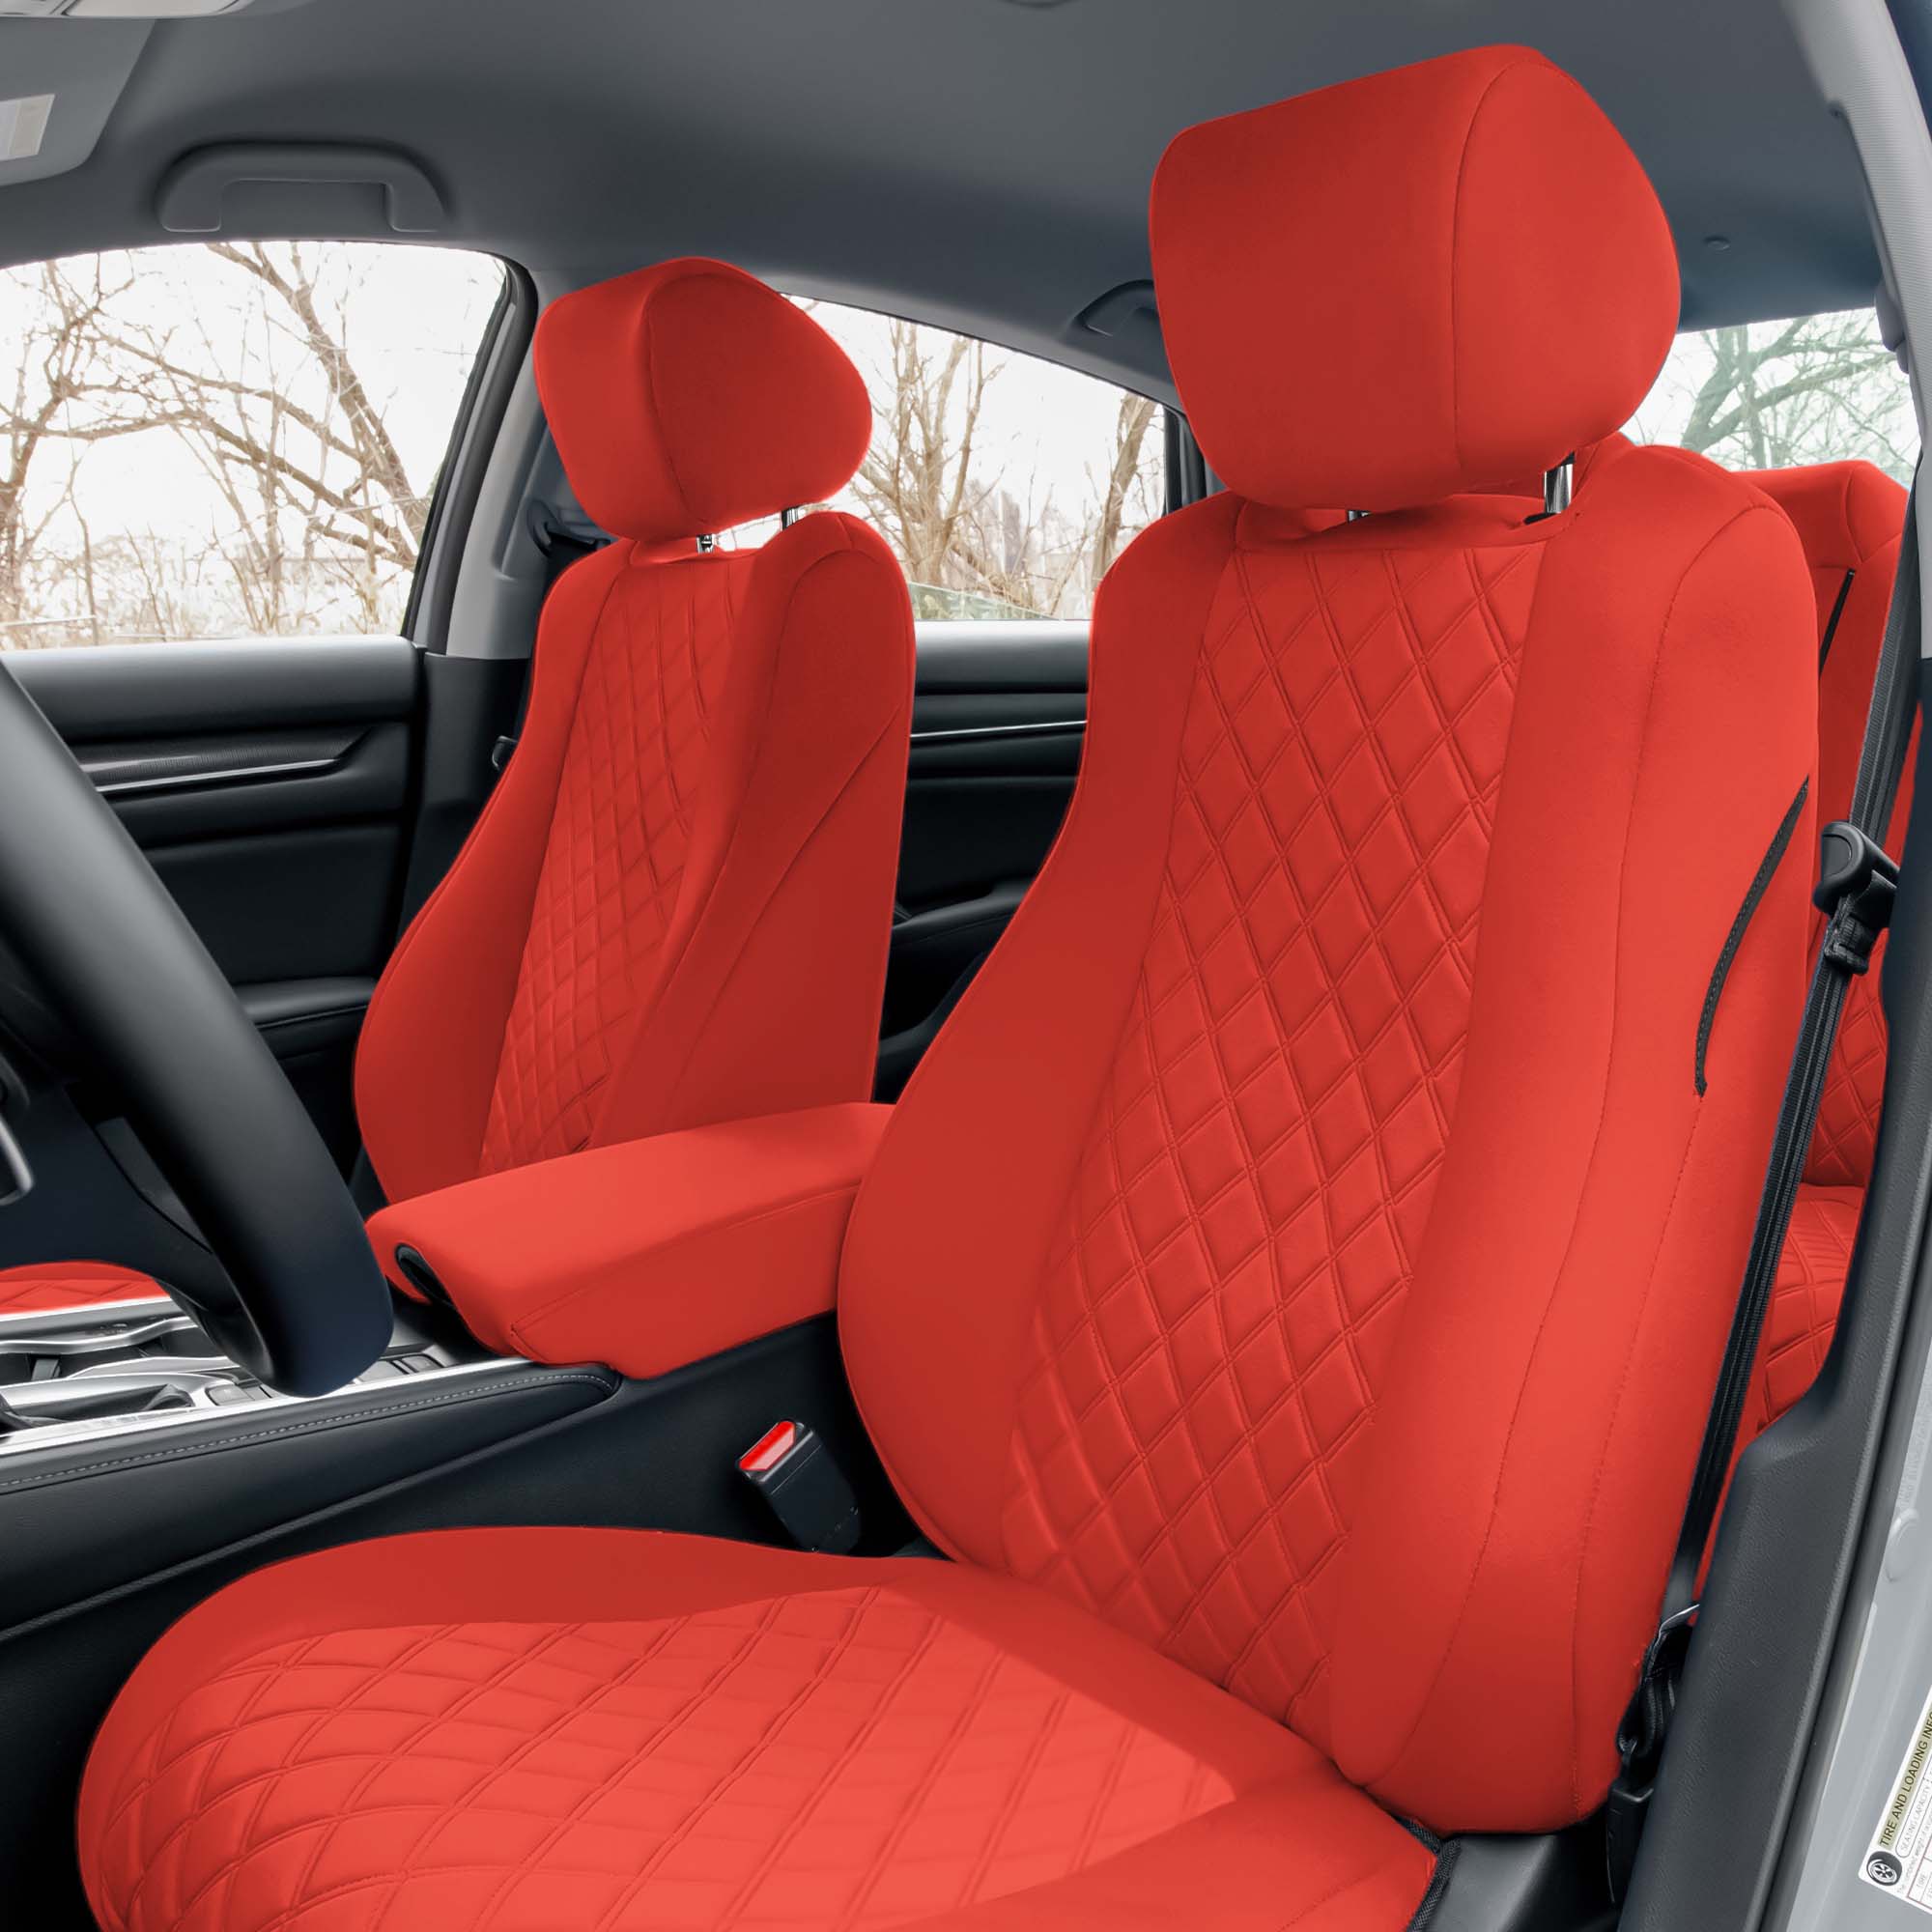 Honda Accord - 2018 - 2022 - Front Set Seat Covers - Solid Red Ultraflex Neoprene